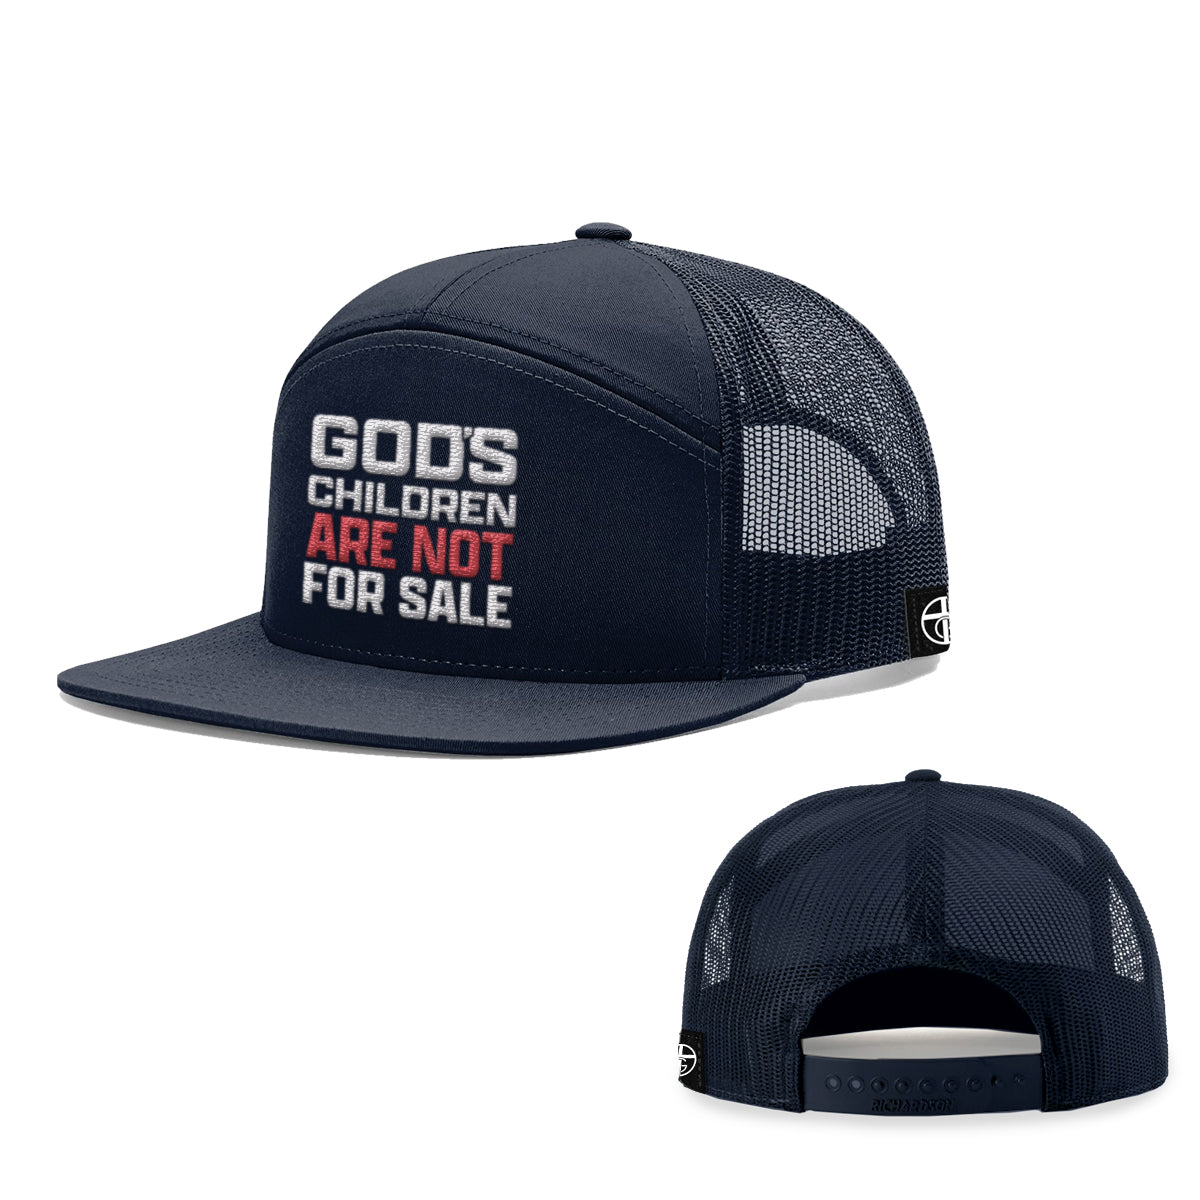 God's Children Are Not For Sale 7 Panel Hats